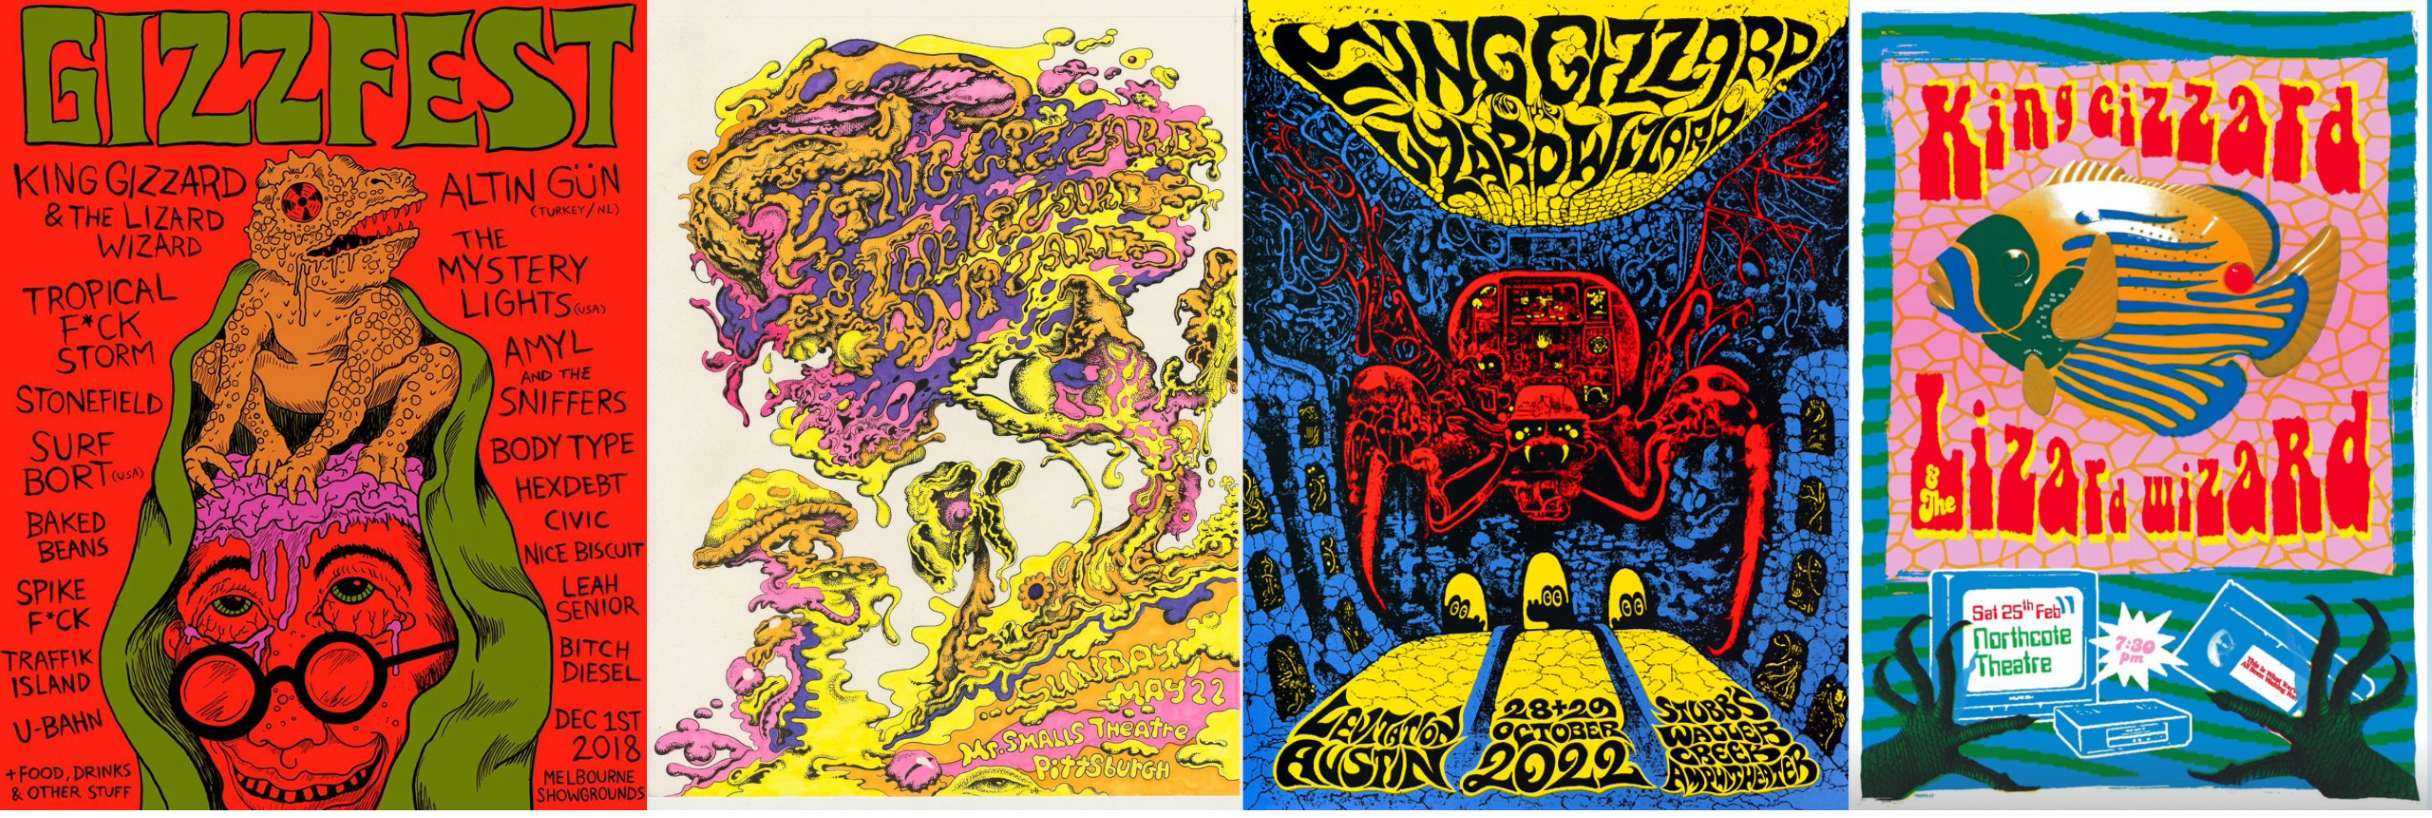 concert posters